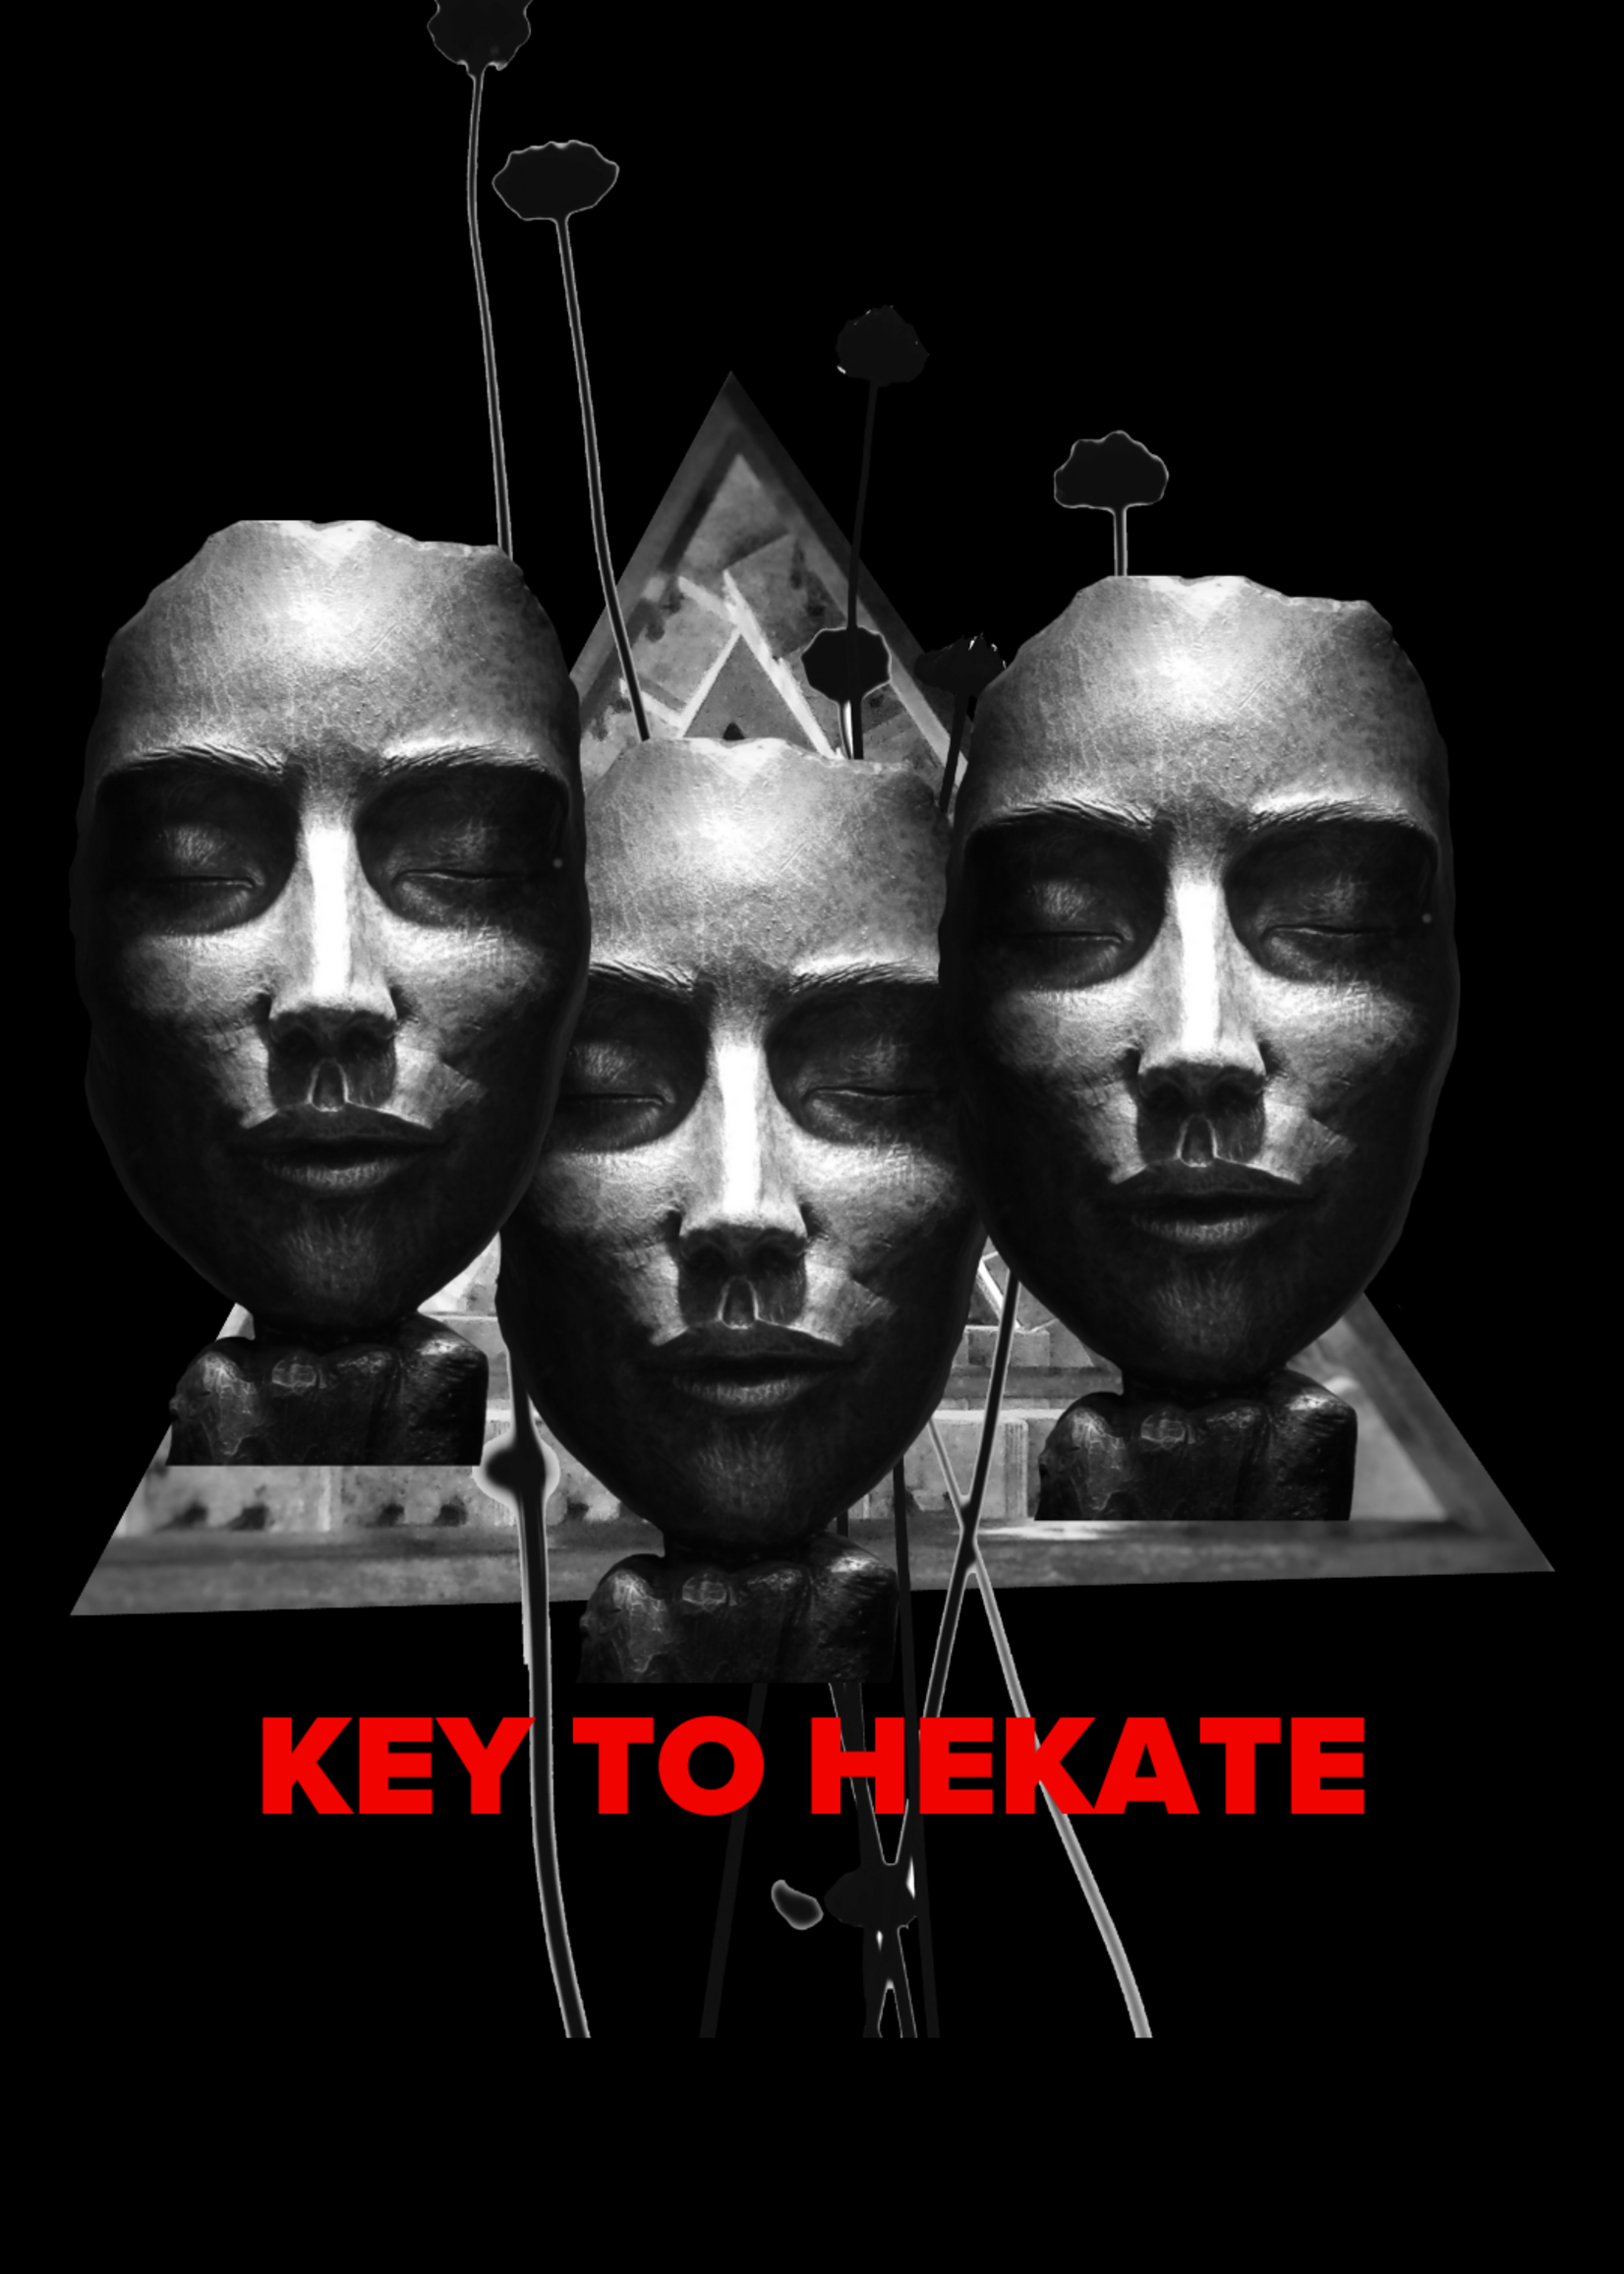 KEY TO HEKATE